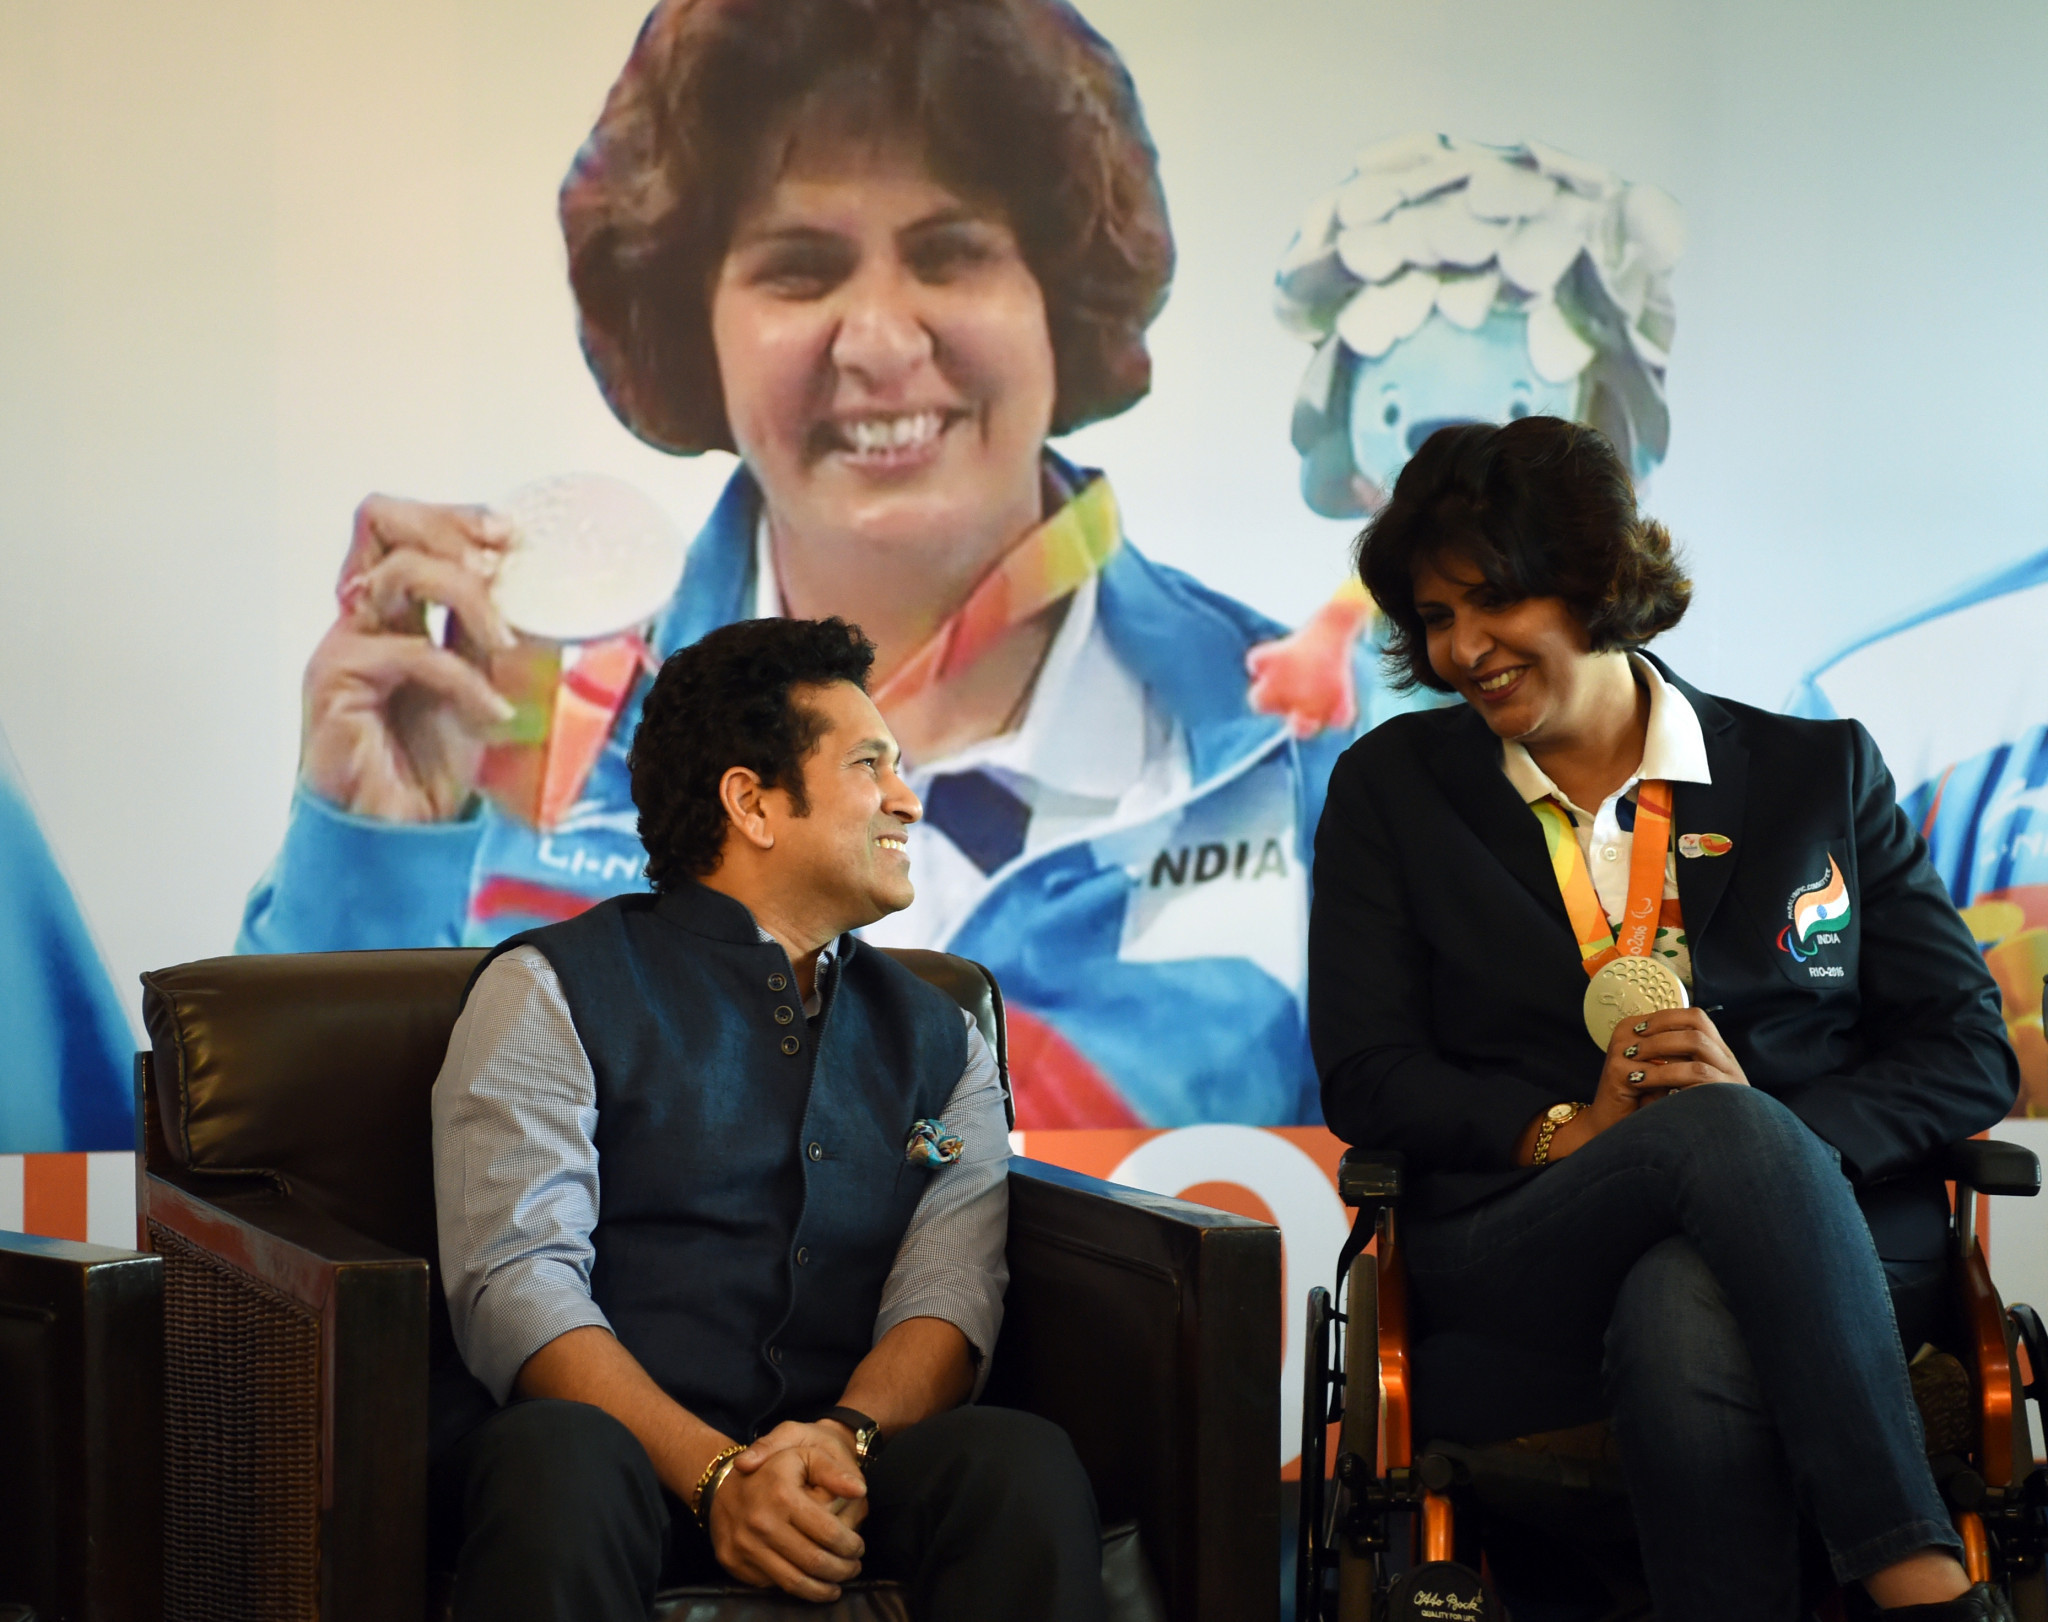 Malik lodges candidacy for Paralympic Committee of India Presidency